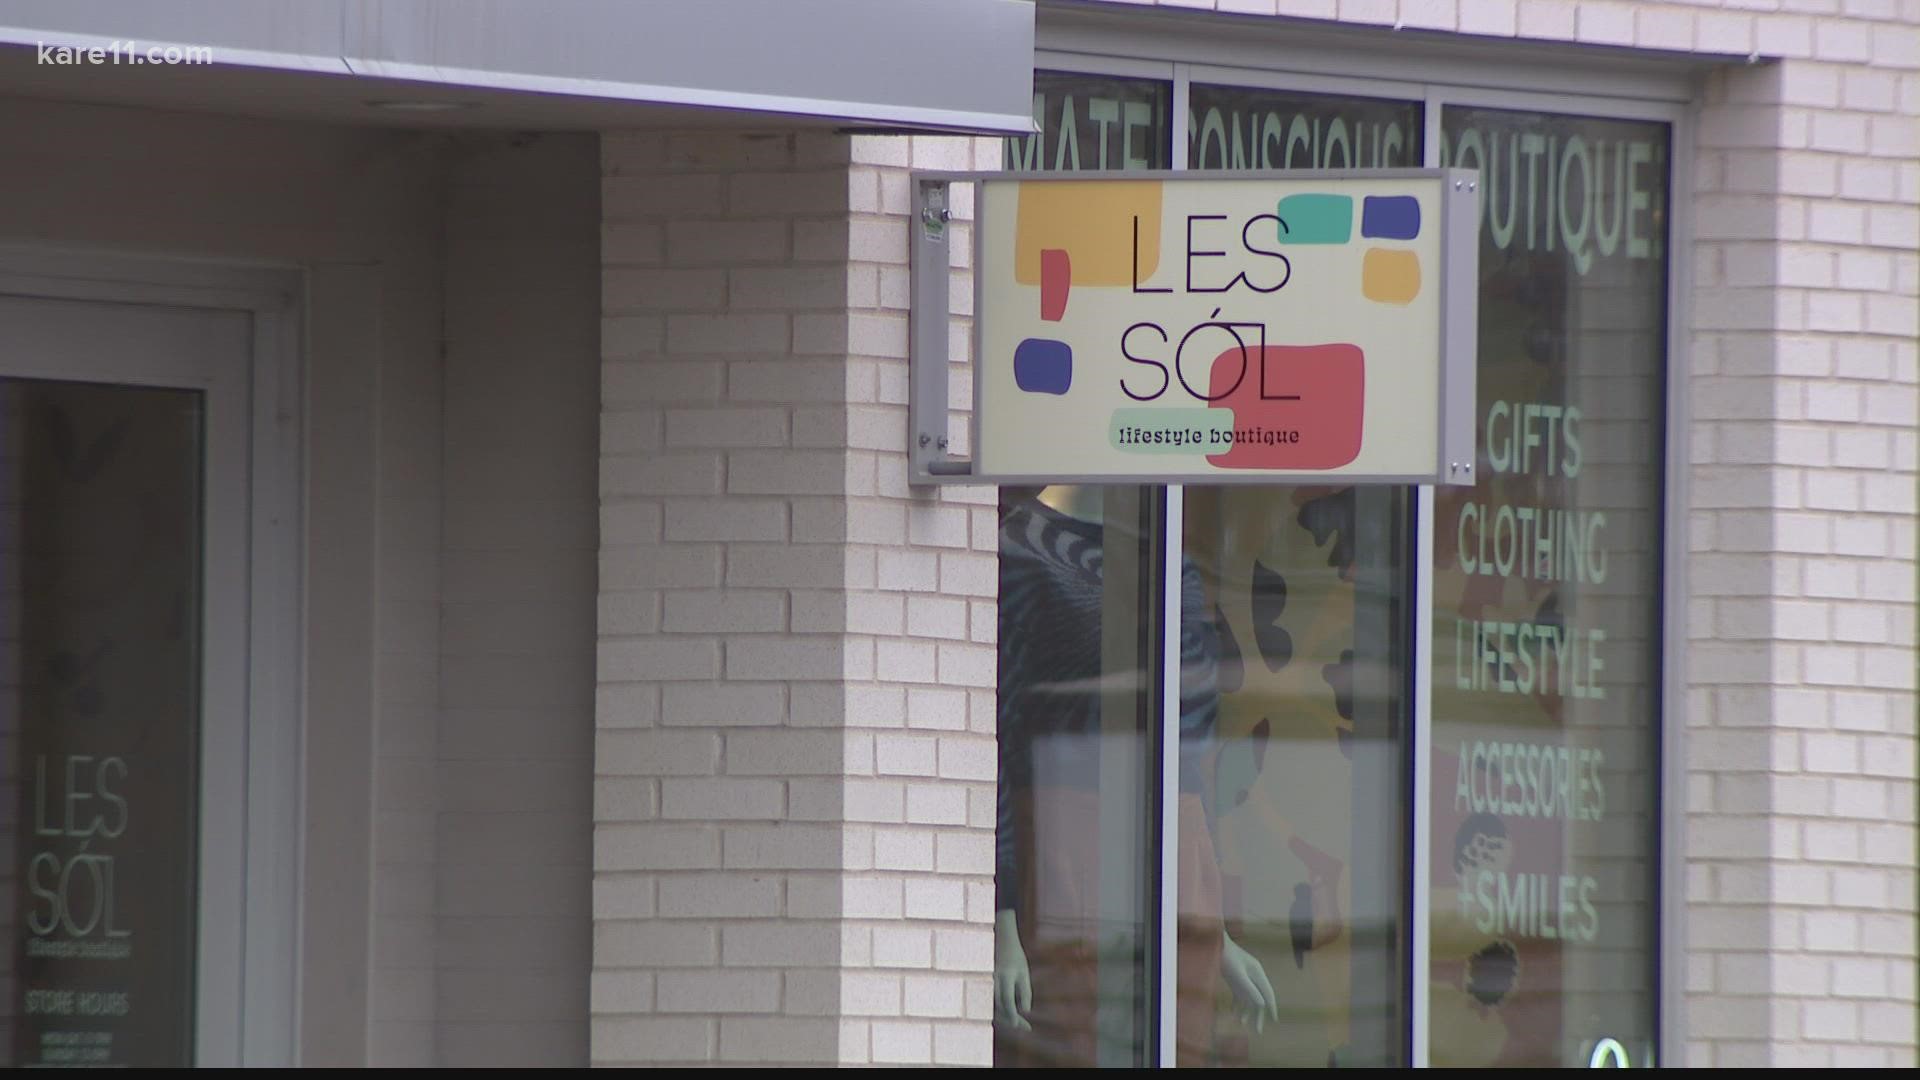 Local small businesses say a few extra dollars during the holiday shopping season could make another year possible.